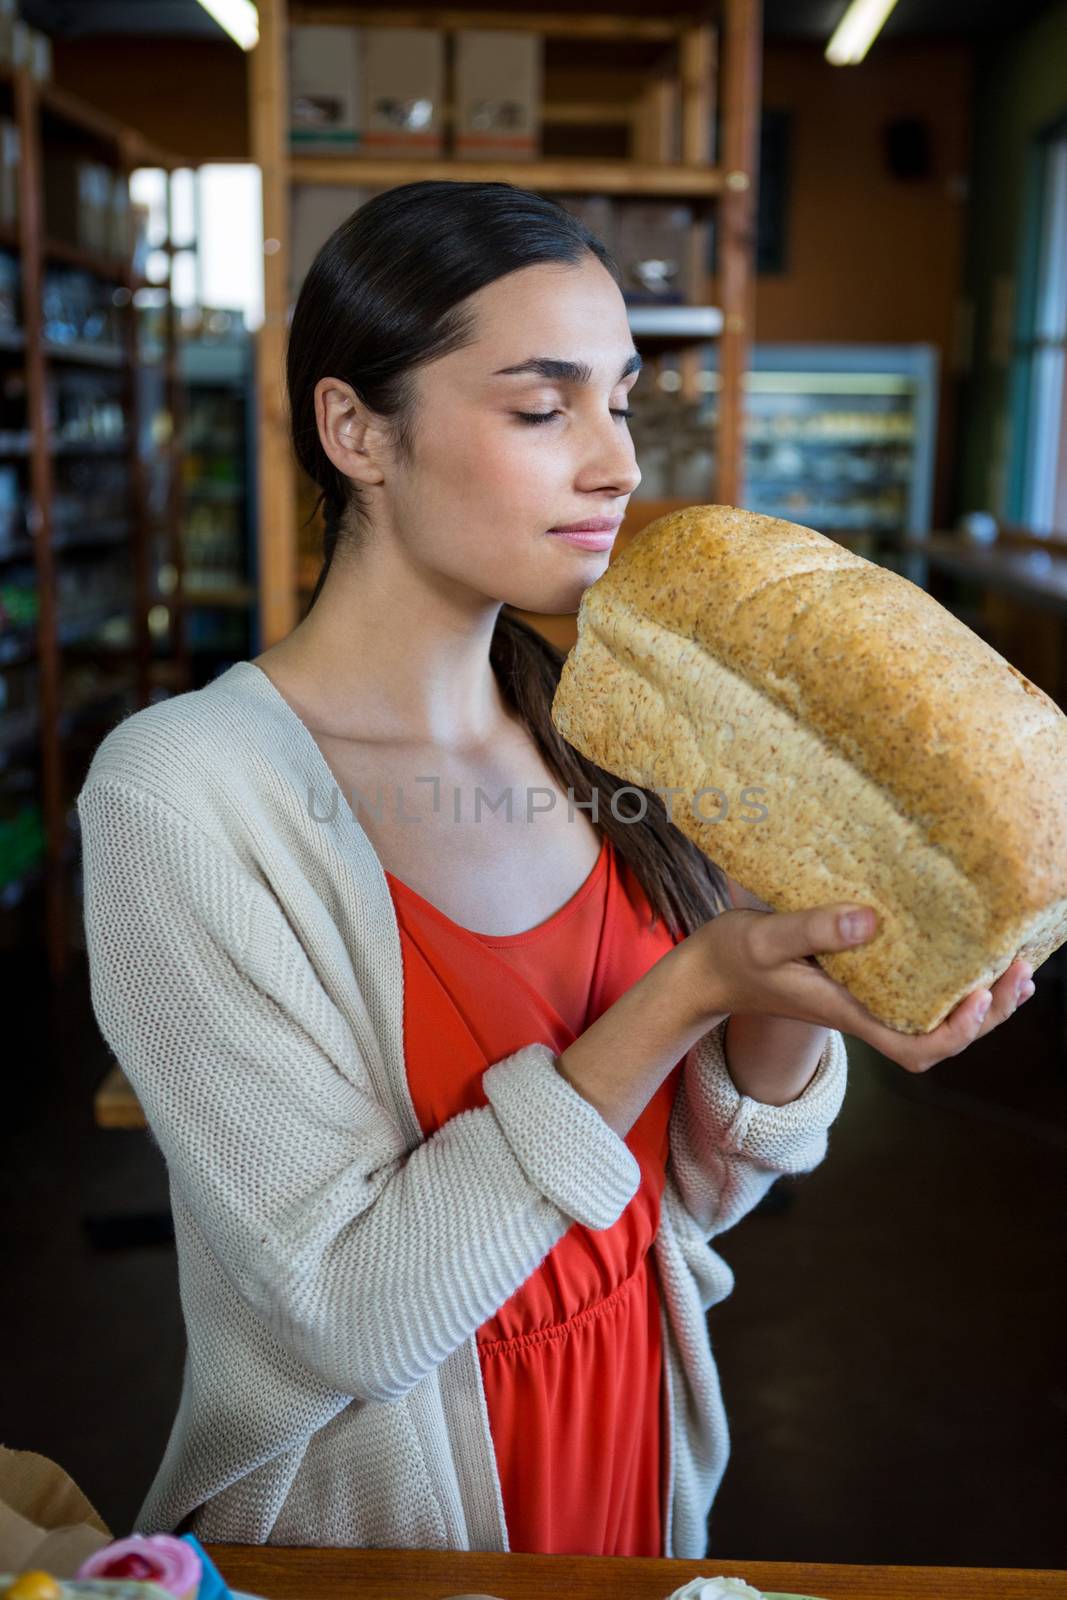 Woman smelling a loaf of bread in supermarket